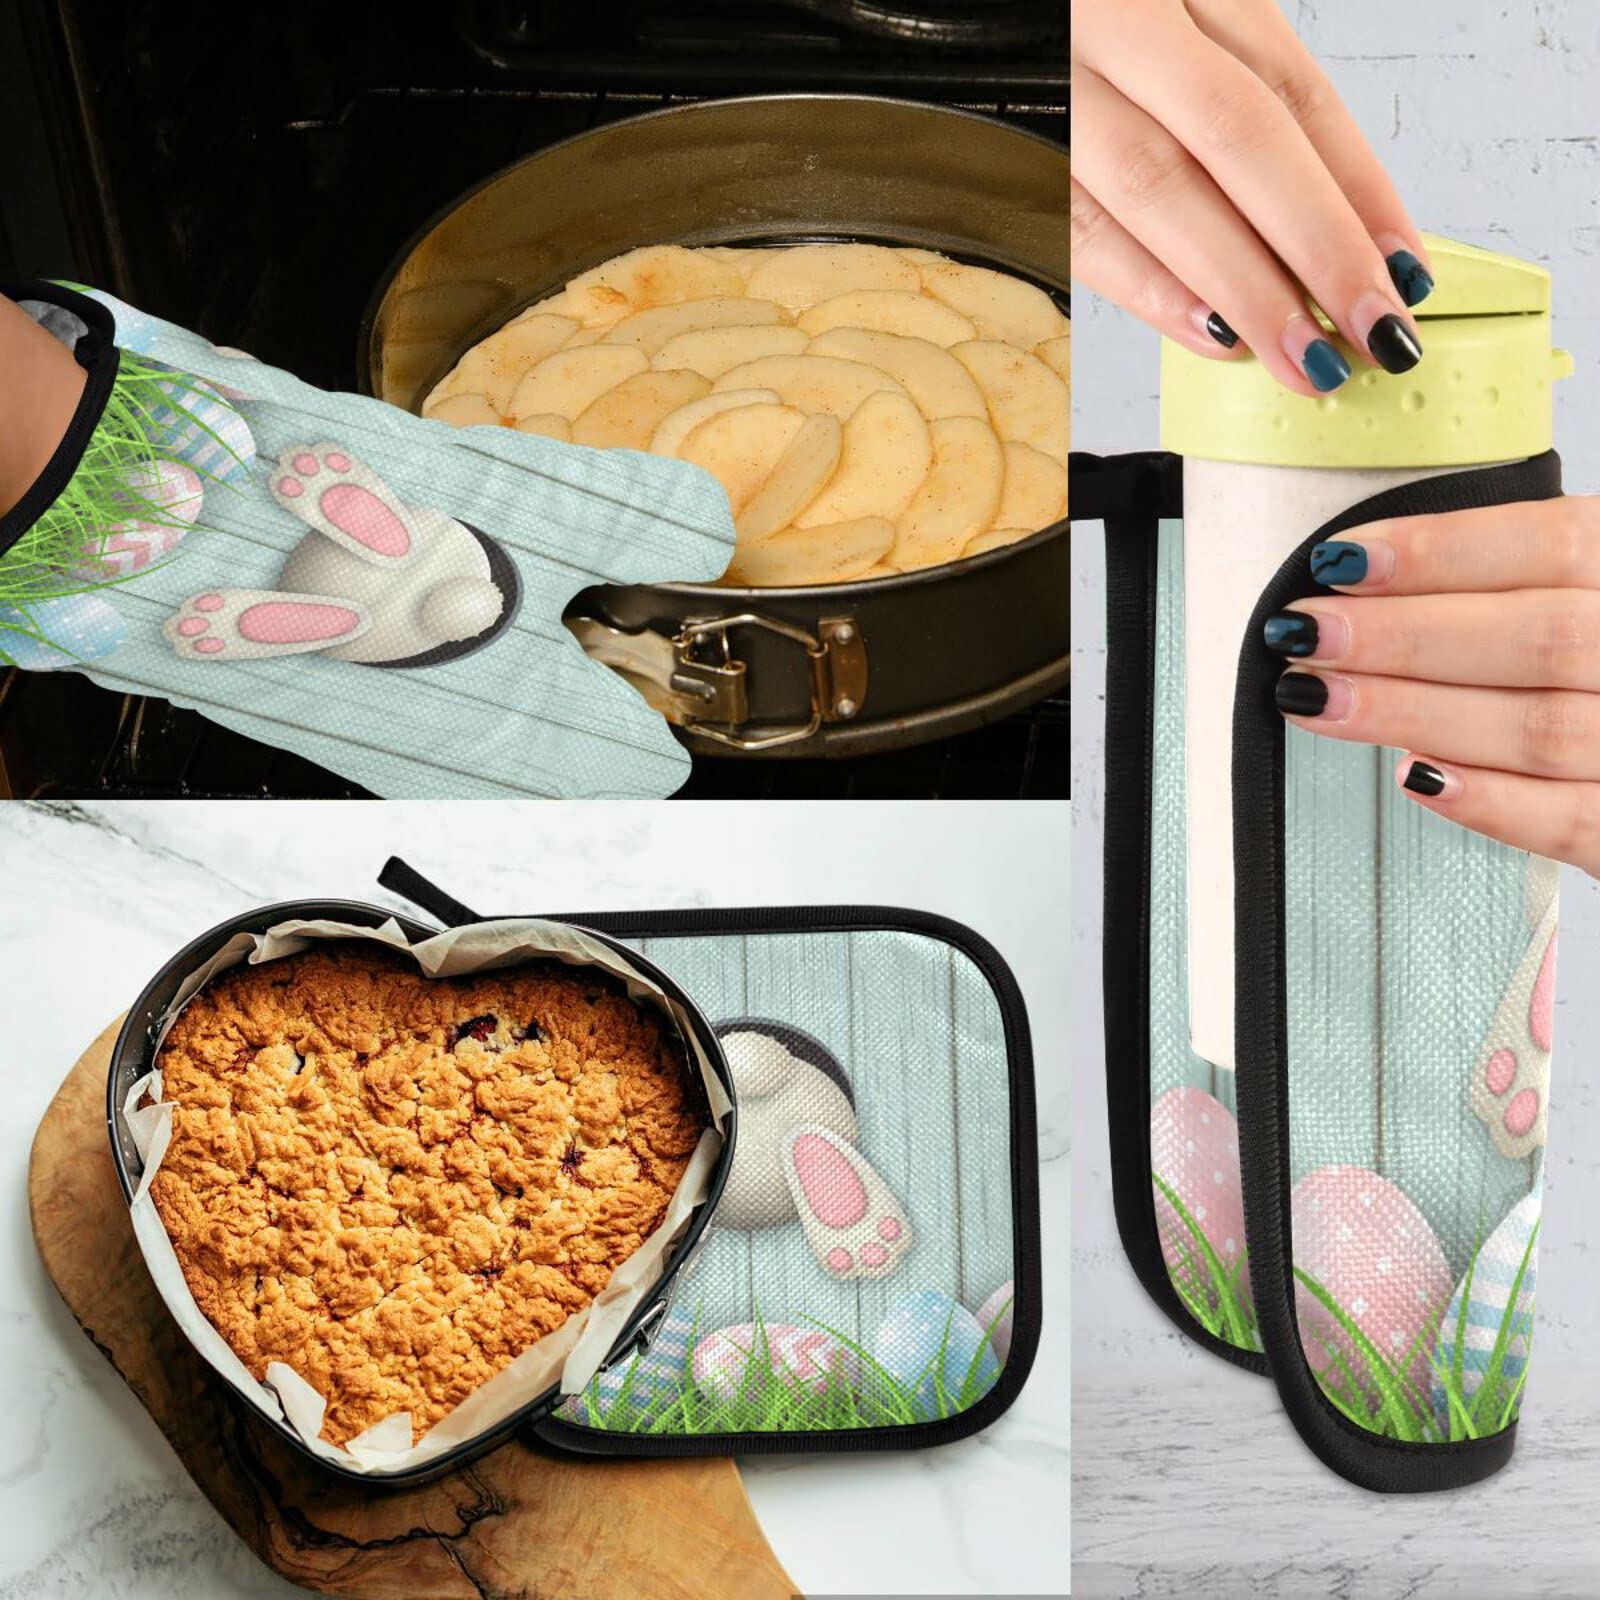 Cute Bunny Easter Egg Oven Mitts and Pot Holders, Funny Spring Hot Pads & Gloves Oven Mitts Potholders Mittens for Kitchen Cooking BBQ Baking Bakeware